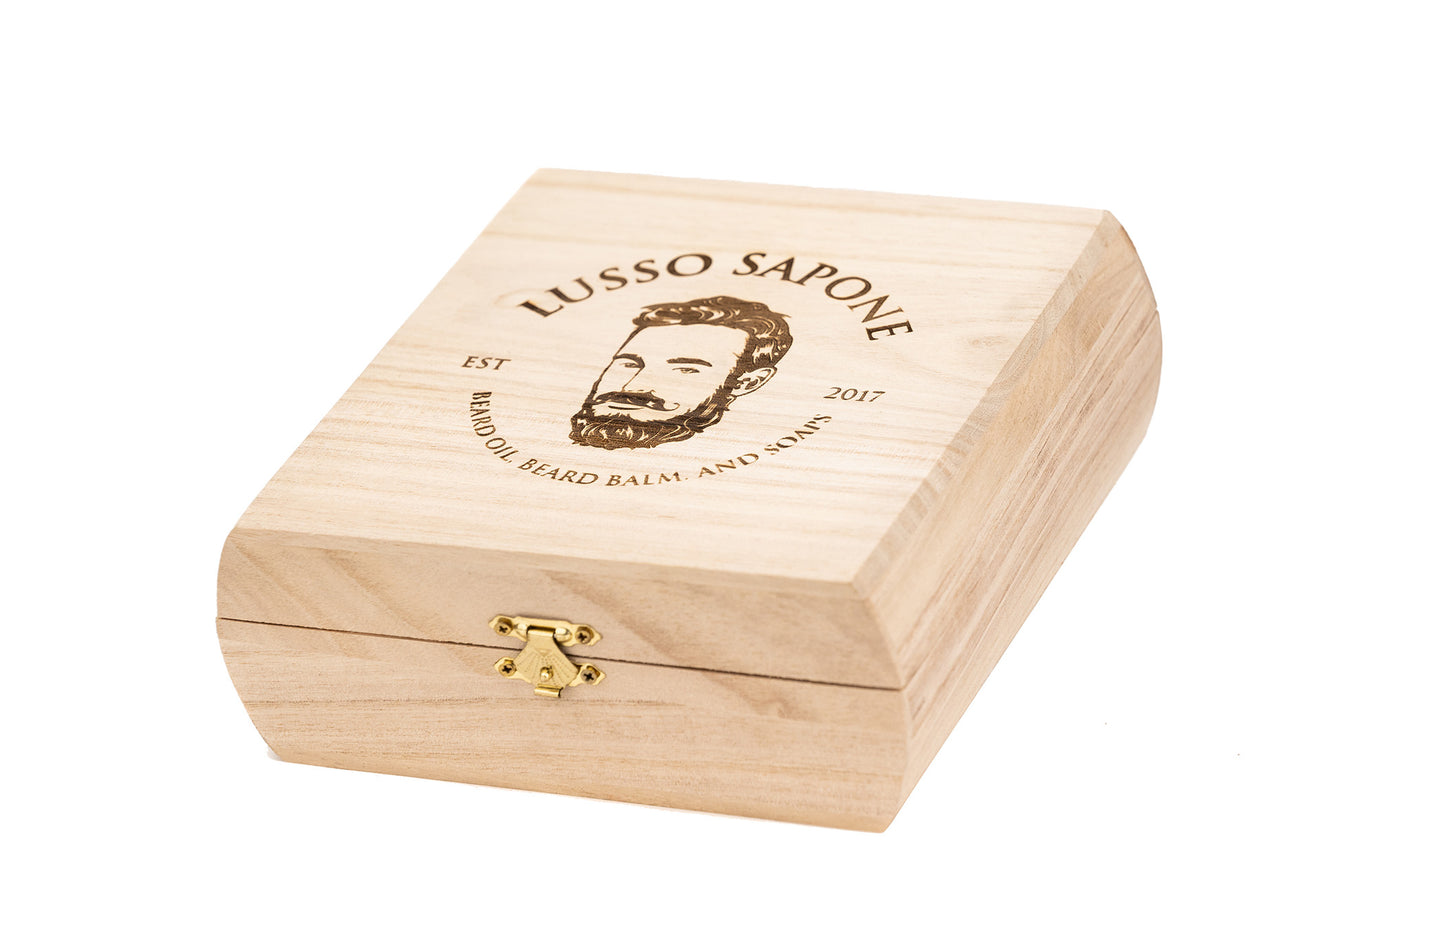 
                  
                    Large Beard Grooming Kit | Contains 4oz Beard Oil, 4oz Beard Balm, 4 oz Beard Wax, 4 oz Beard Wash & Wood Comb in a Wood Box
                  
                